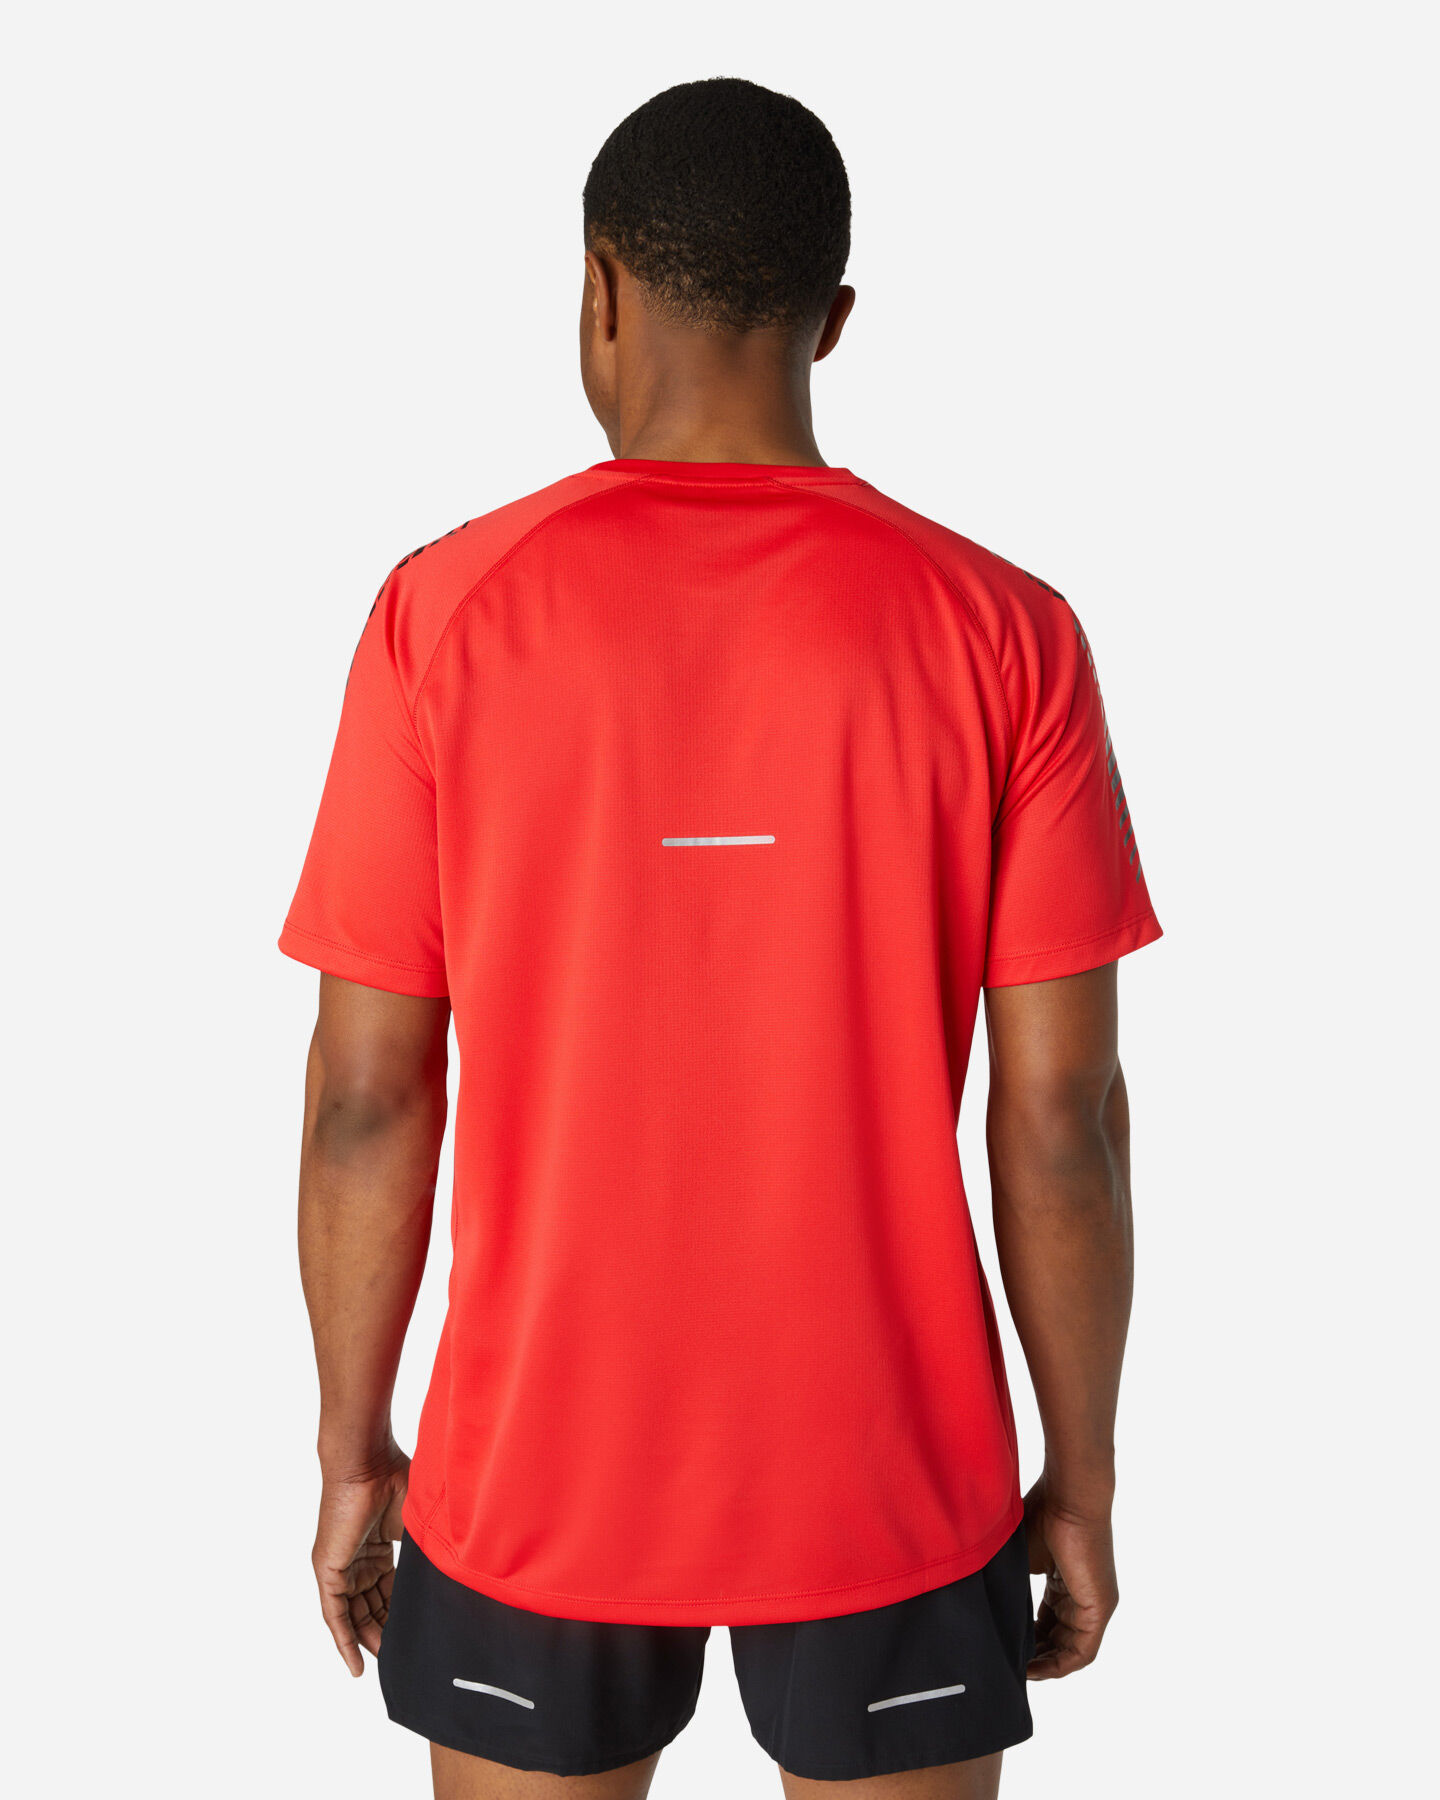  T-Shirt running ASICS ICON RED M S5341480|600|S scatto 2